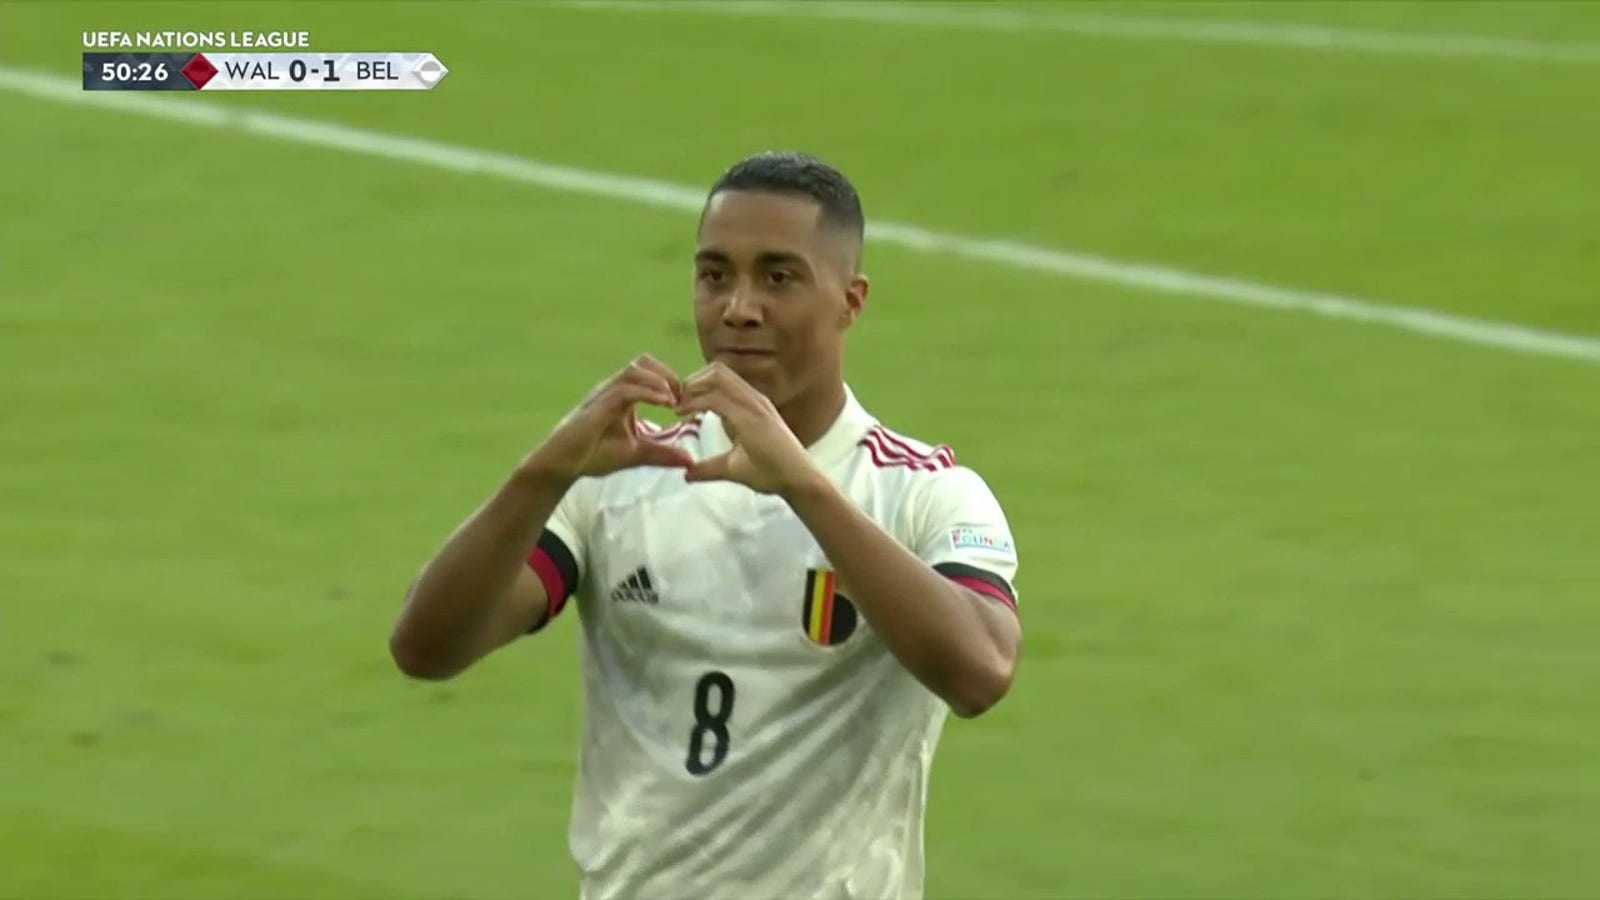 Youri Tielemans blasts an impressive goal to help Belgium grab a 1-0 lead vs. Wales